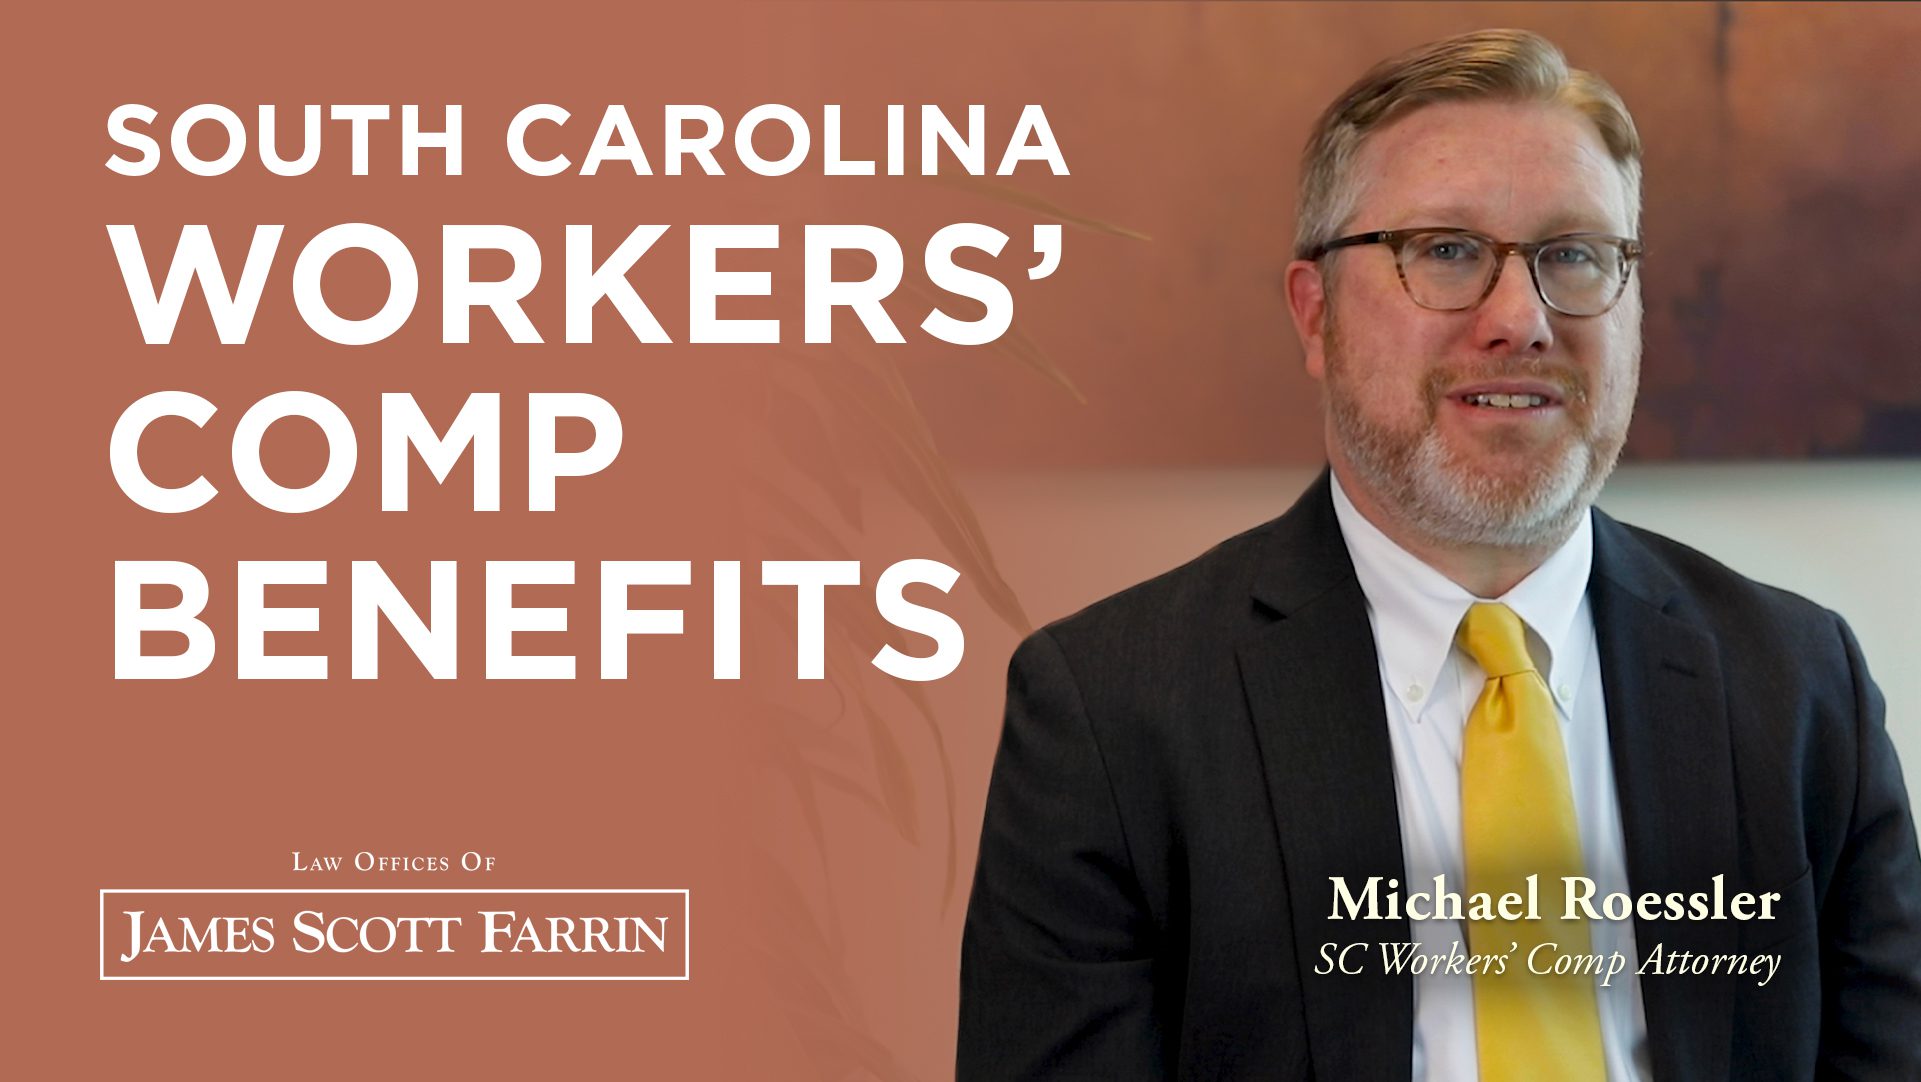 Michael Roessler shares South Carolina Workers' Comp Benefits